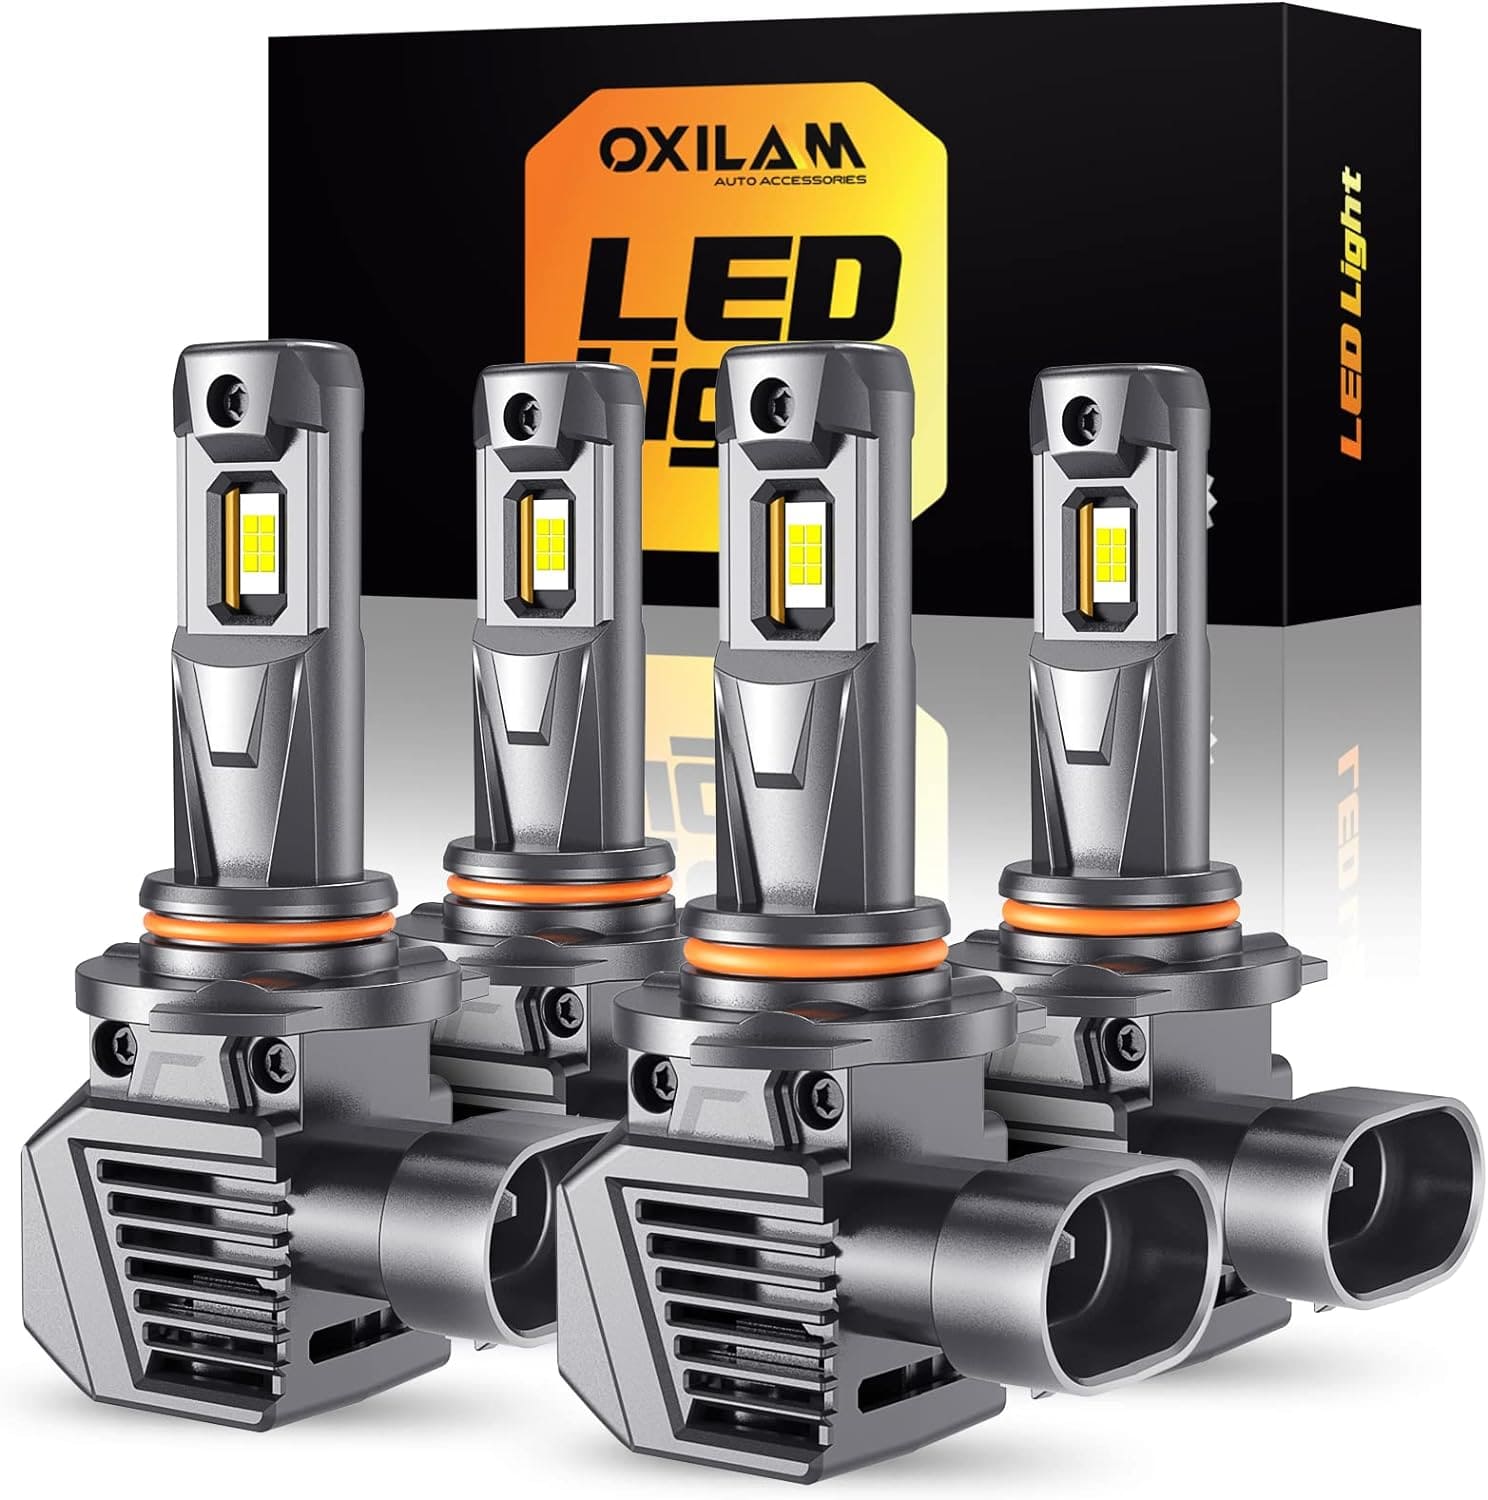 Oxilam Motor Vehicle Lighting OXILAM 9005 9006 LED Bulbs Combo, 52000LM, 6500K HB3 HB4 Halogen Replacement